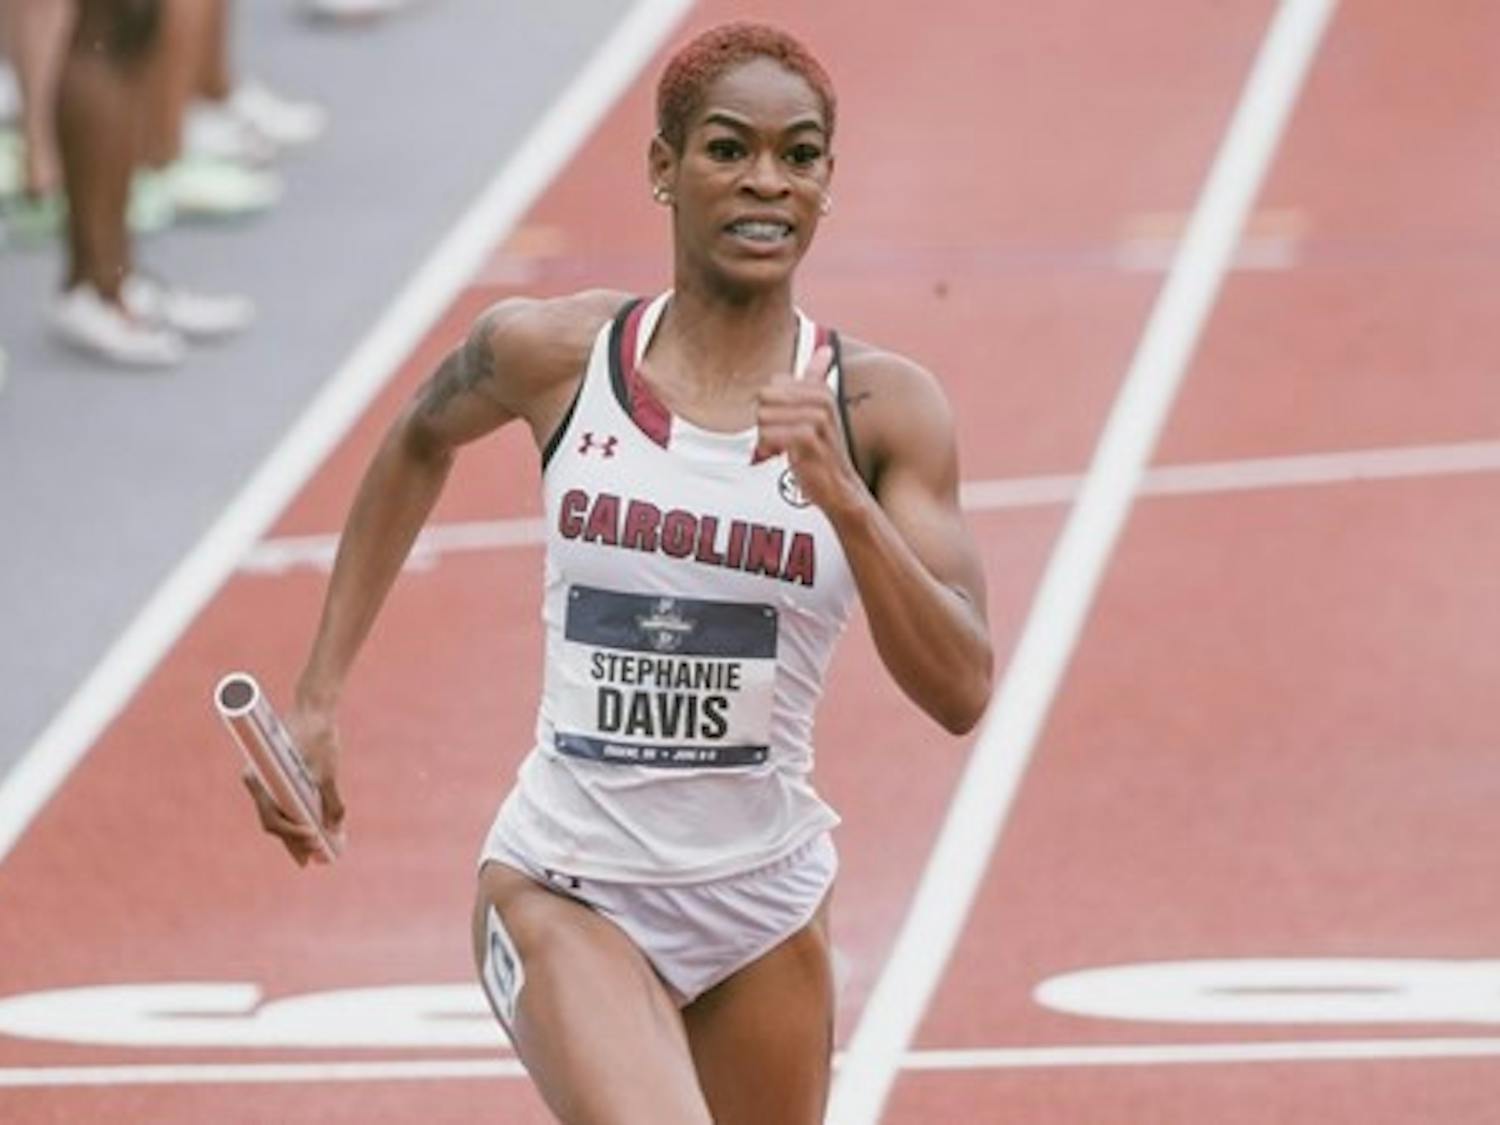 A picture of graduate sprinter Stephanie Davis at the NCAA track and field national championships. Davis competed in the 4x400-meter relay team and earned First Team All-American honors.